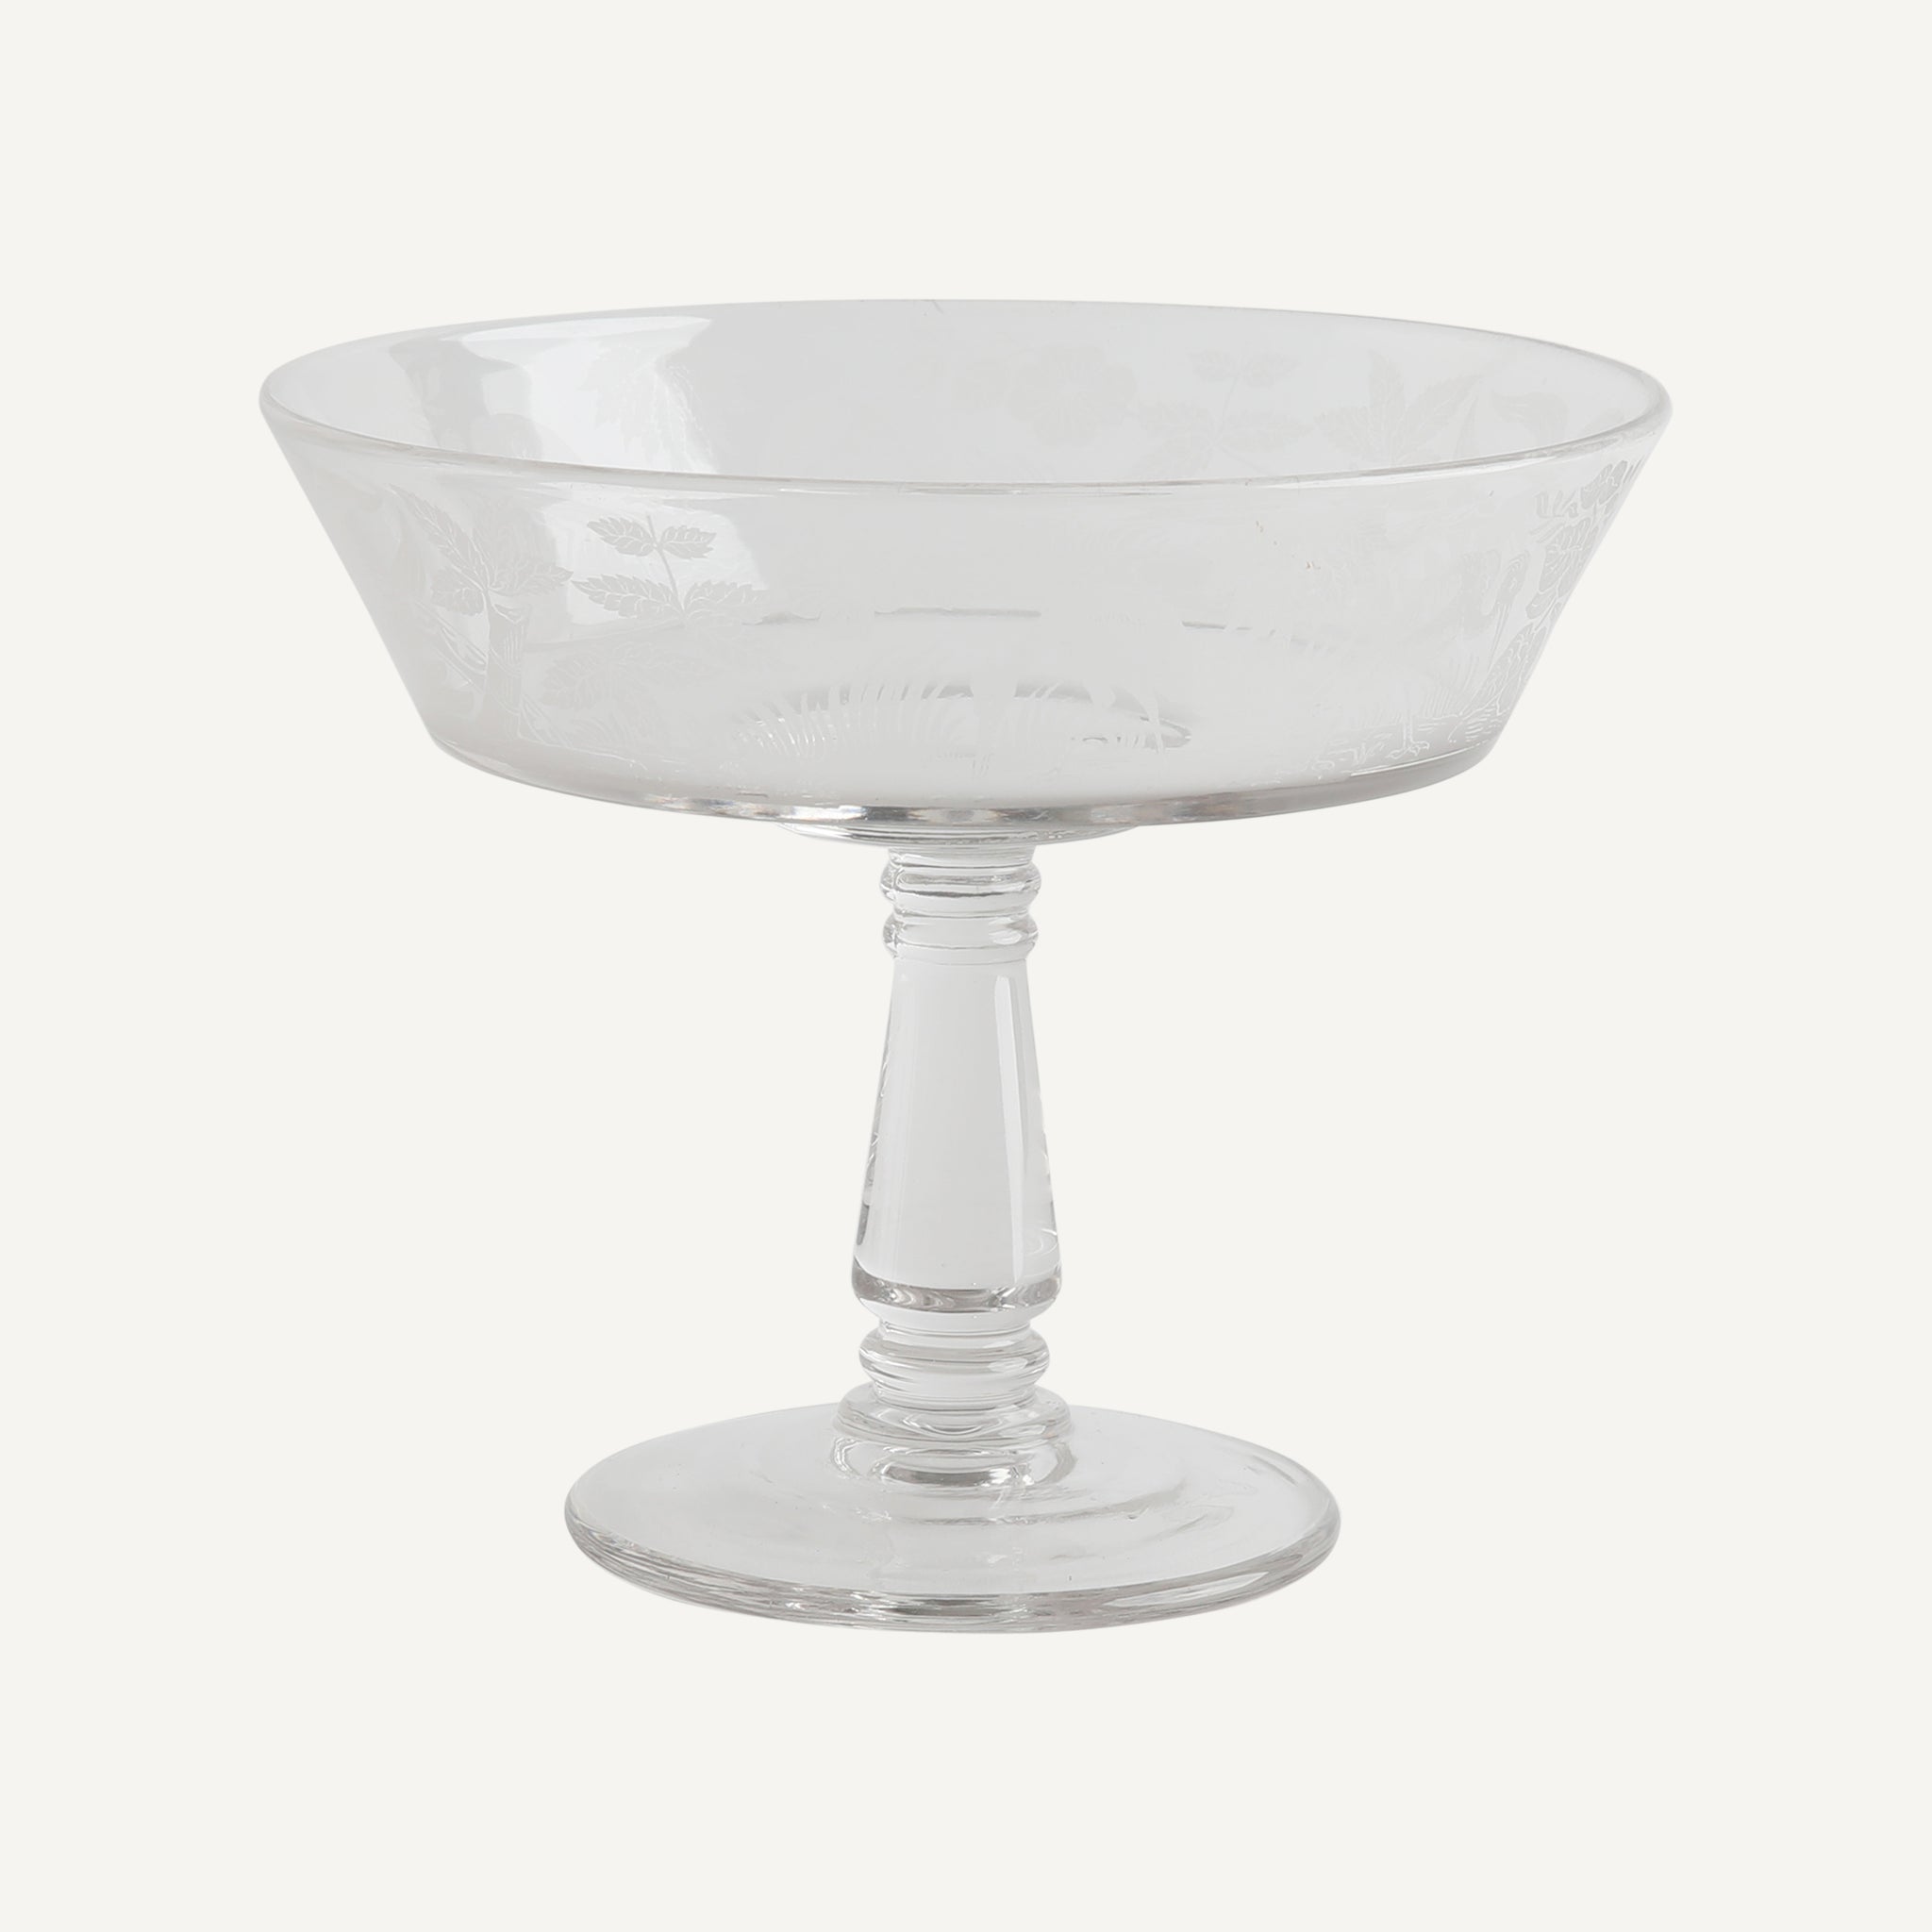 ANTIQUE FROSTED GLASS COMPOTE